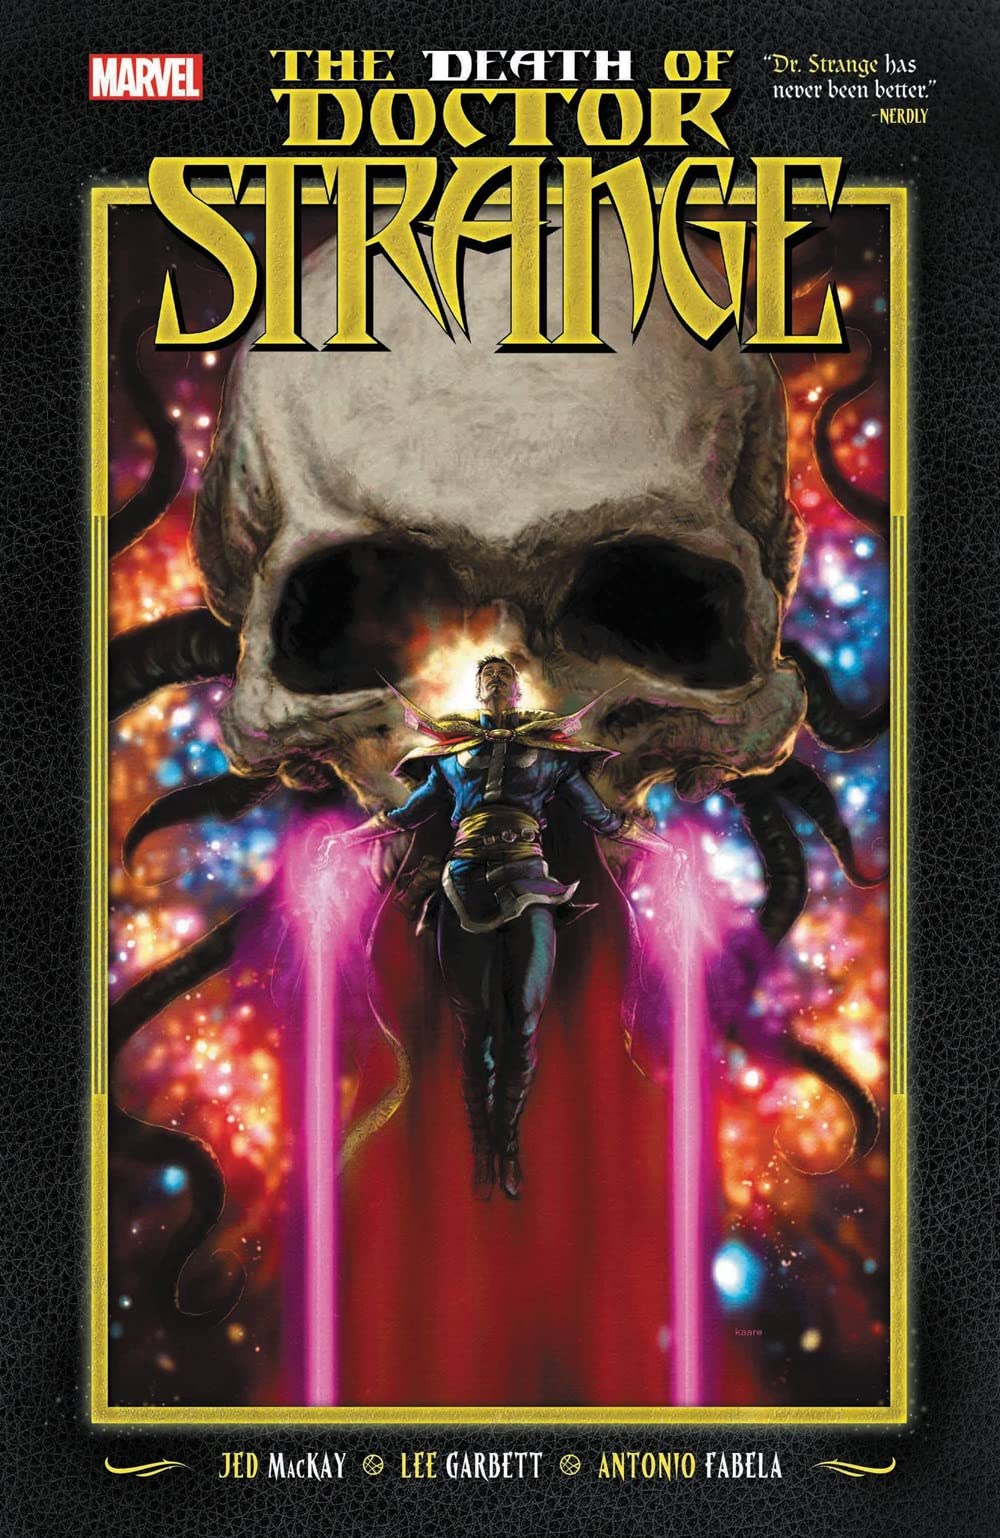 Death of Doctor Strange cover by Kaare Andrews